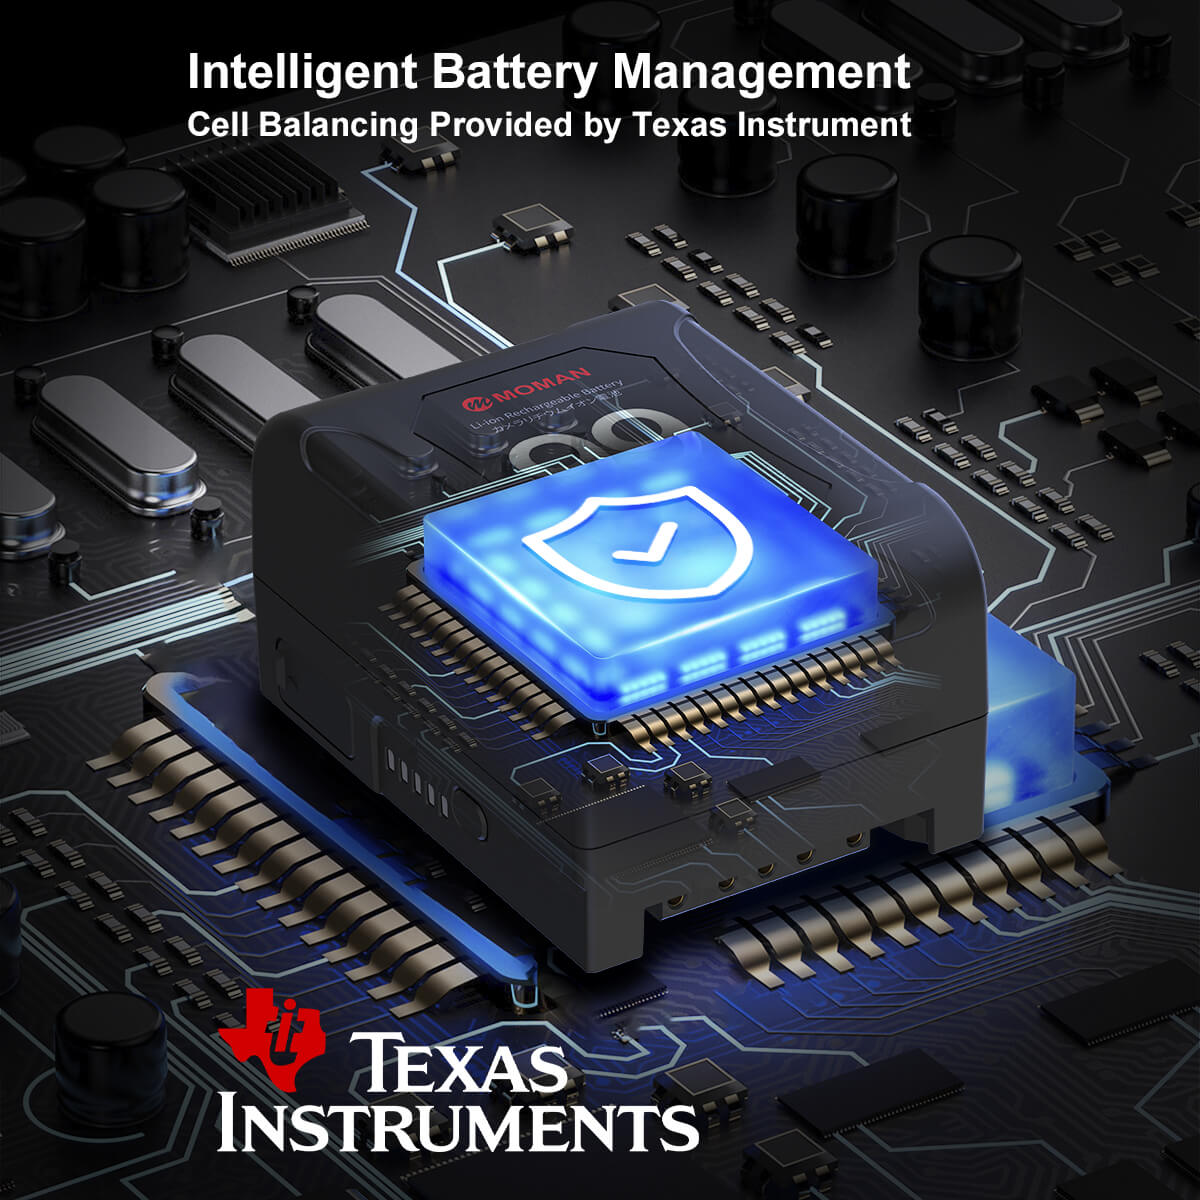 Moman Power 99 has an intelligent battery management circuit for battery longevity with an over-heat protection system.